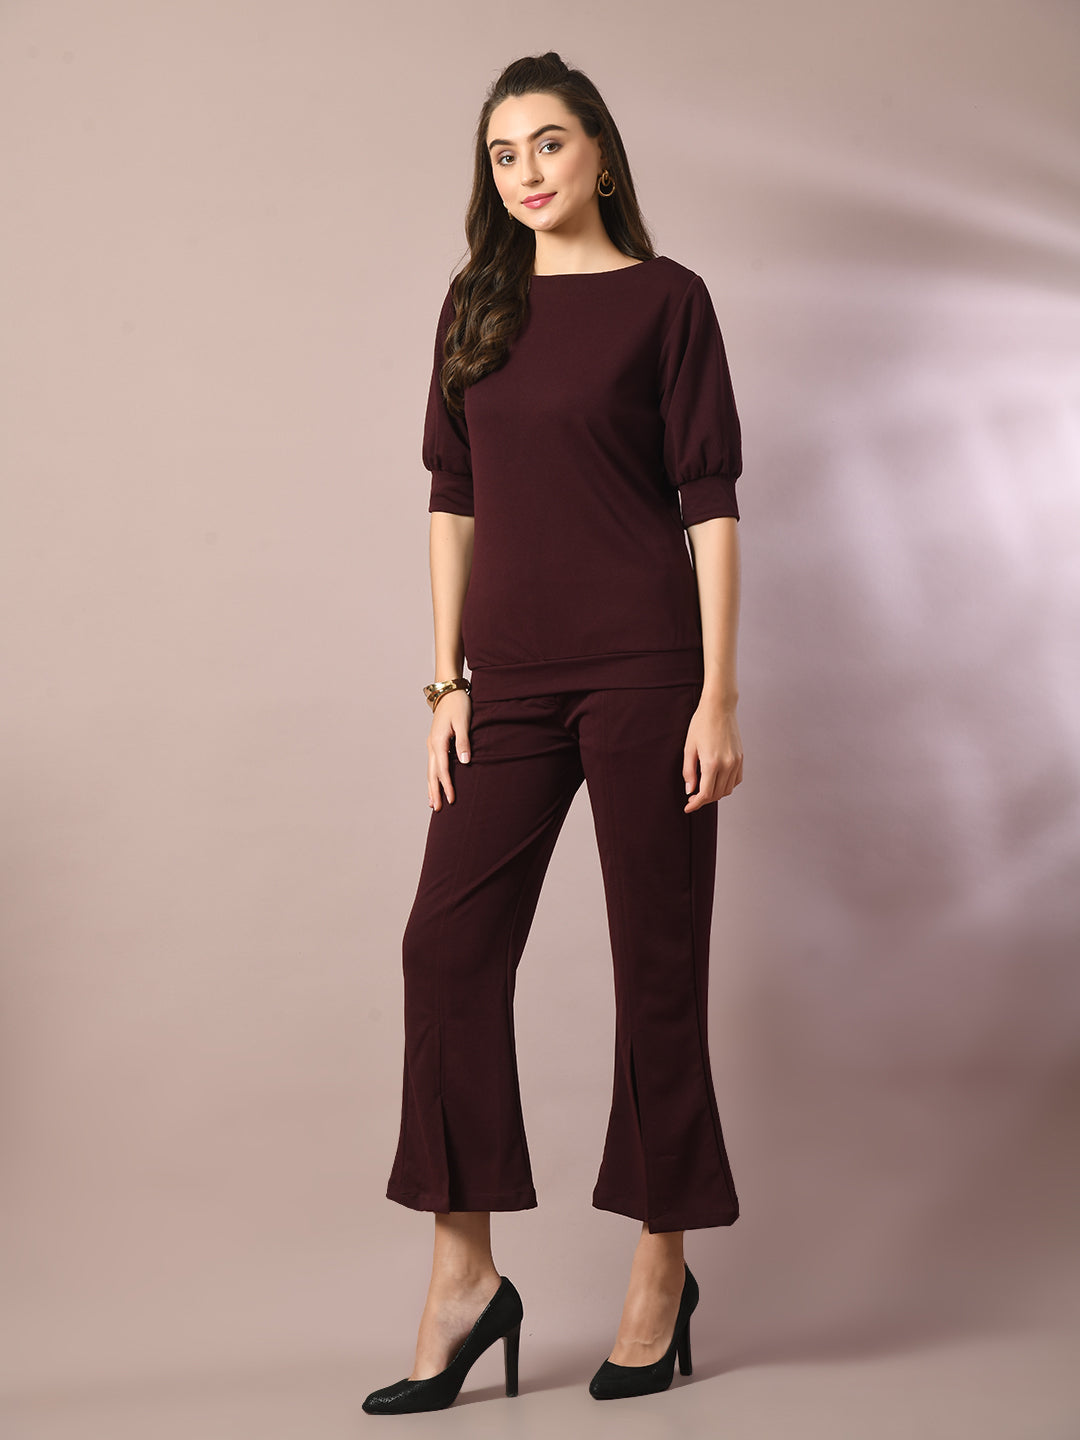 Women's  Coffee Brown Solid Party Parallel Trousers   - Myshka